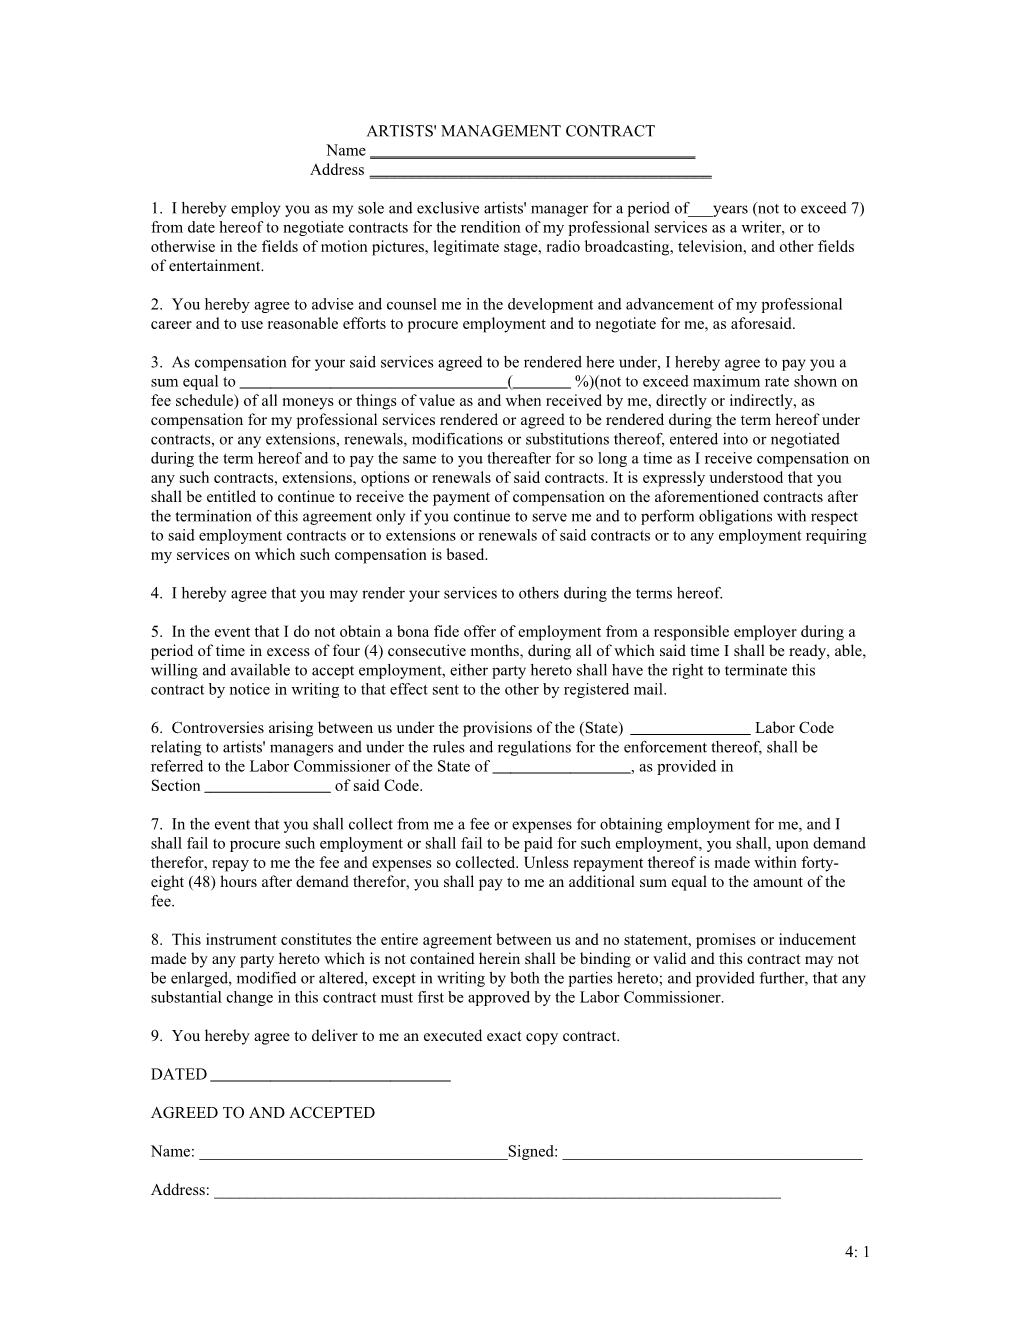 Artists' Management Contract